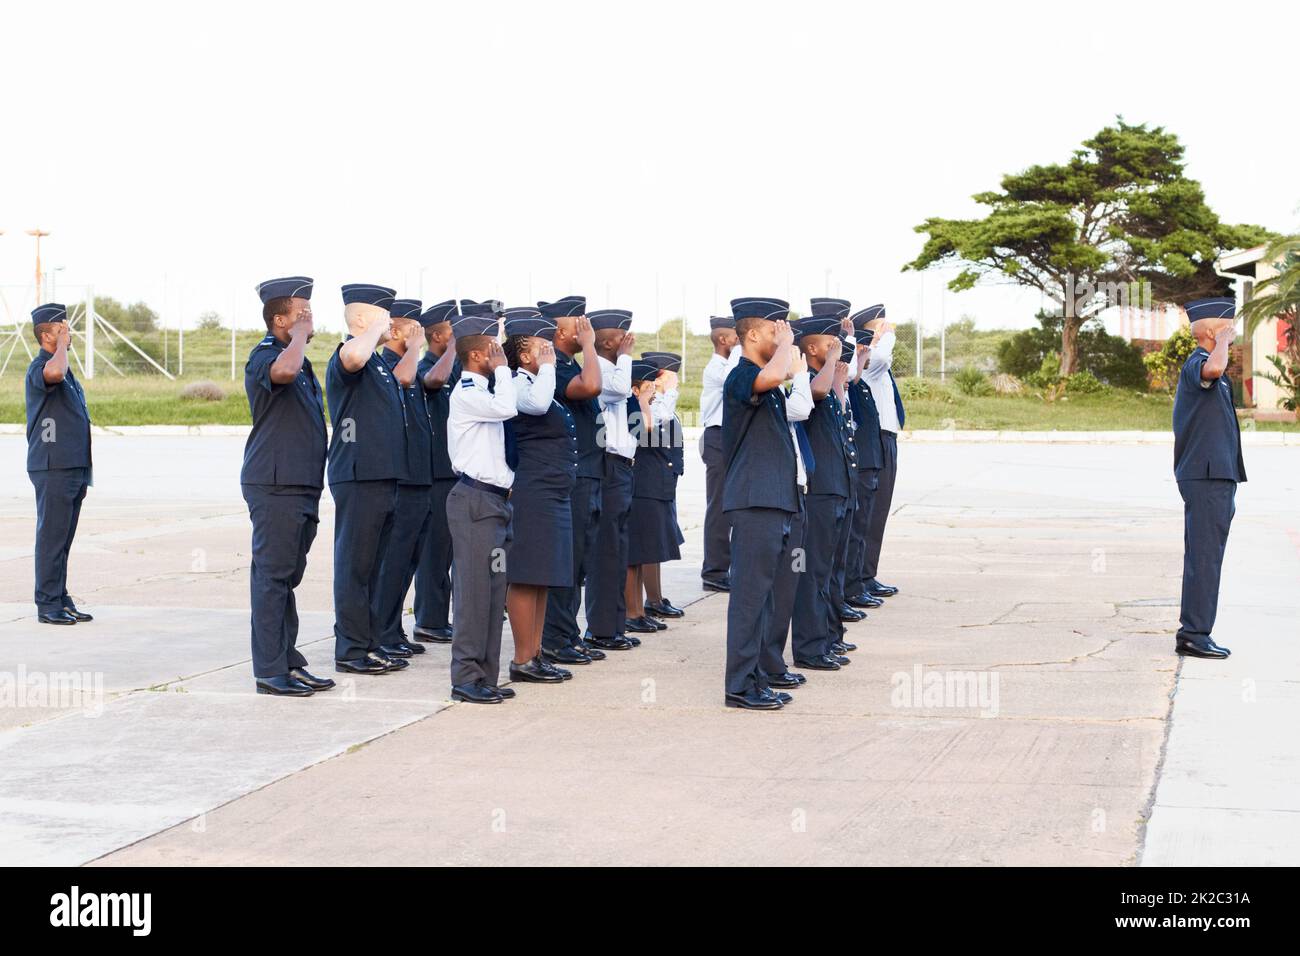 At full attention. Shot of a group of armed forces personnel saluting. Stock Photo